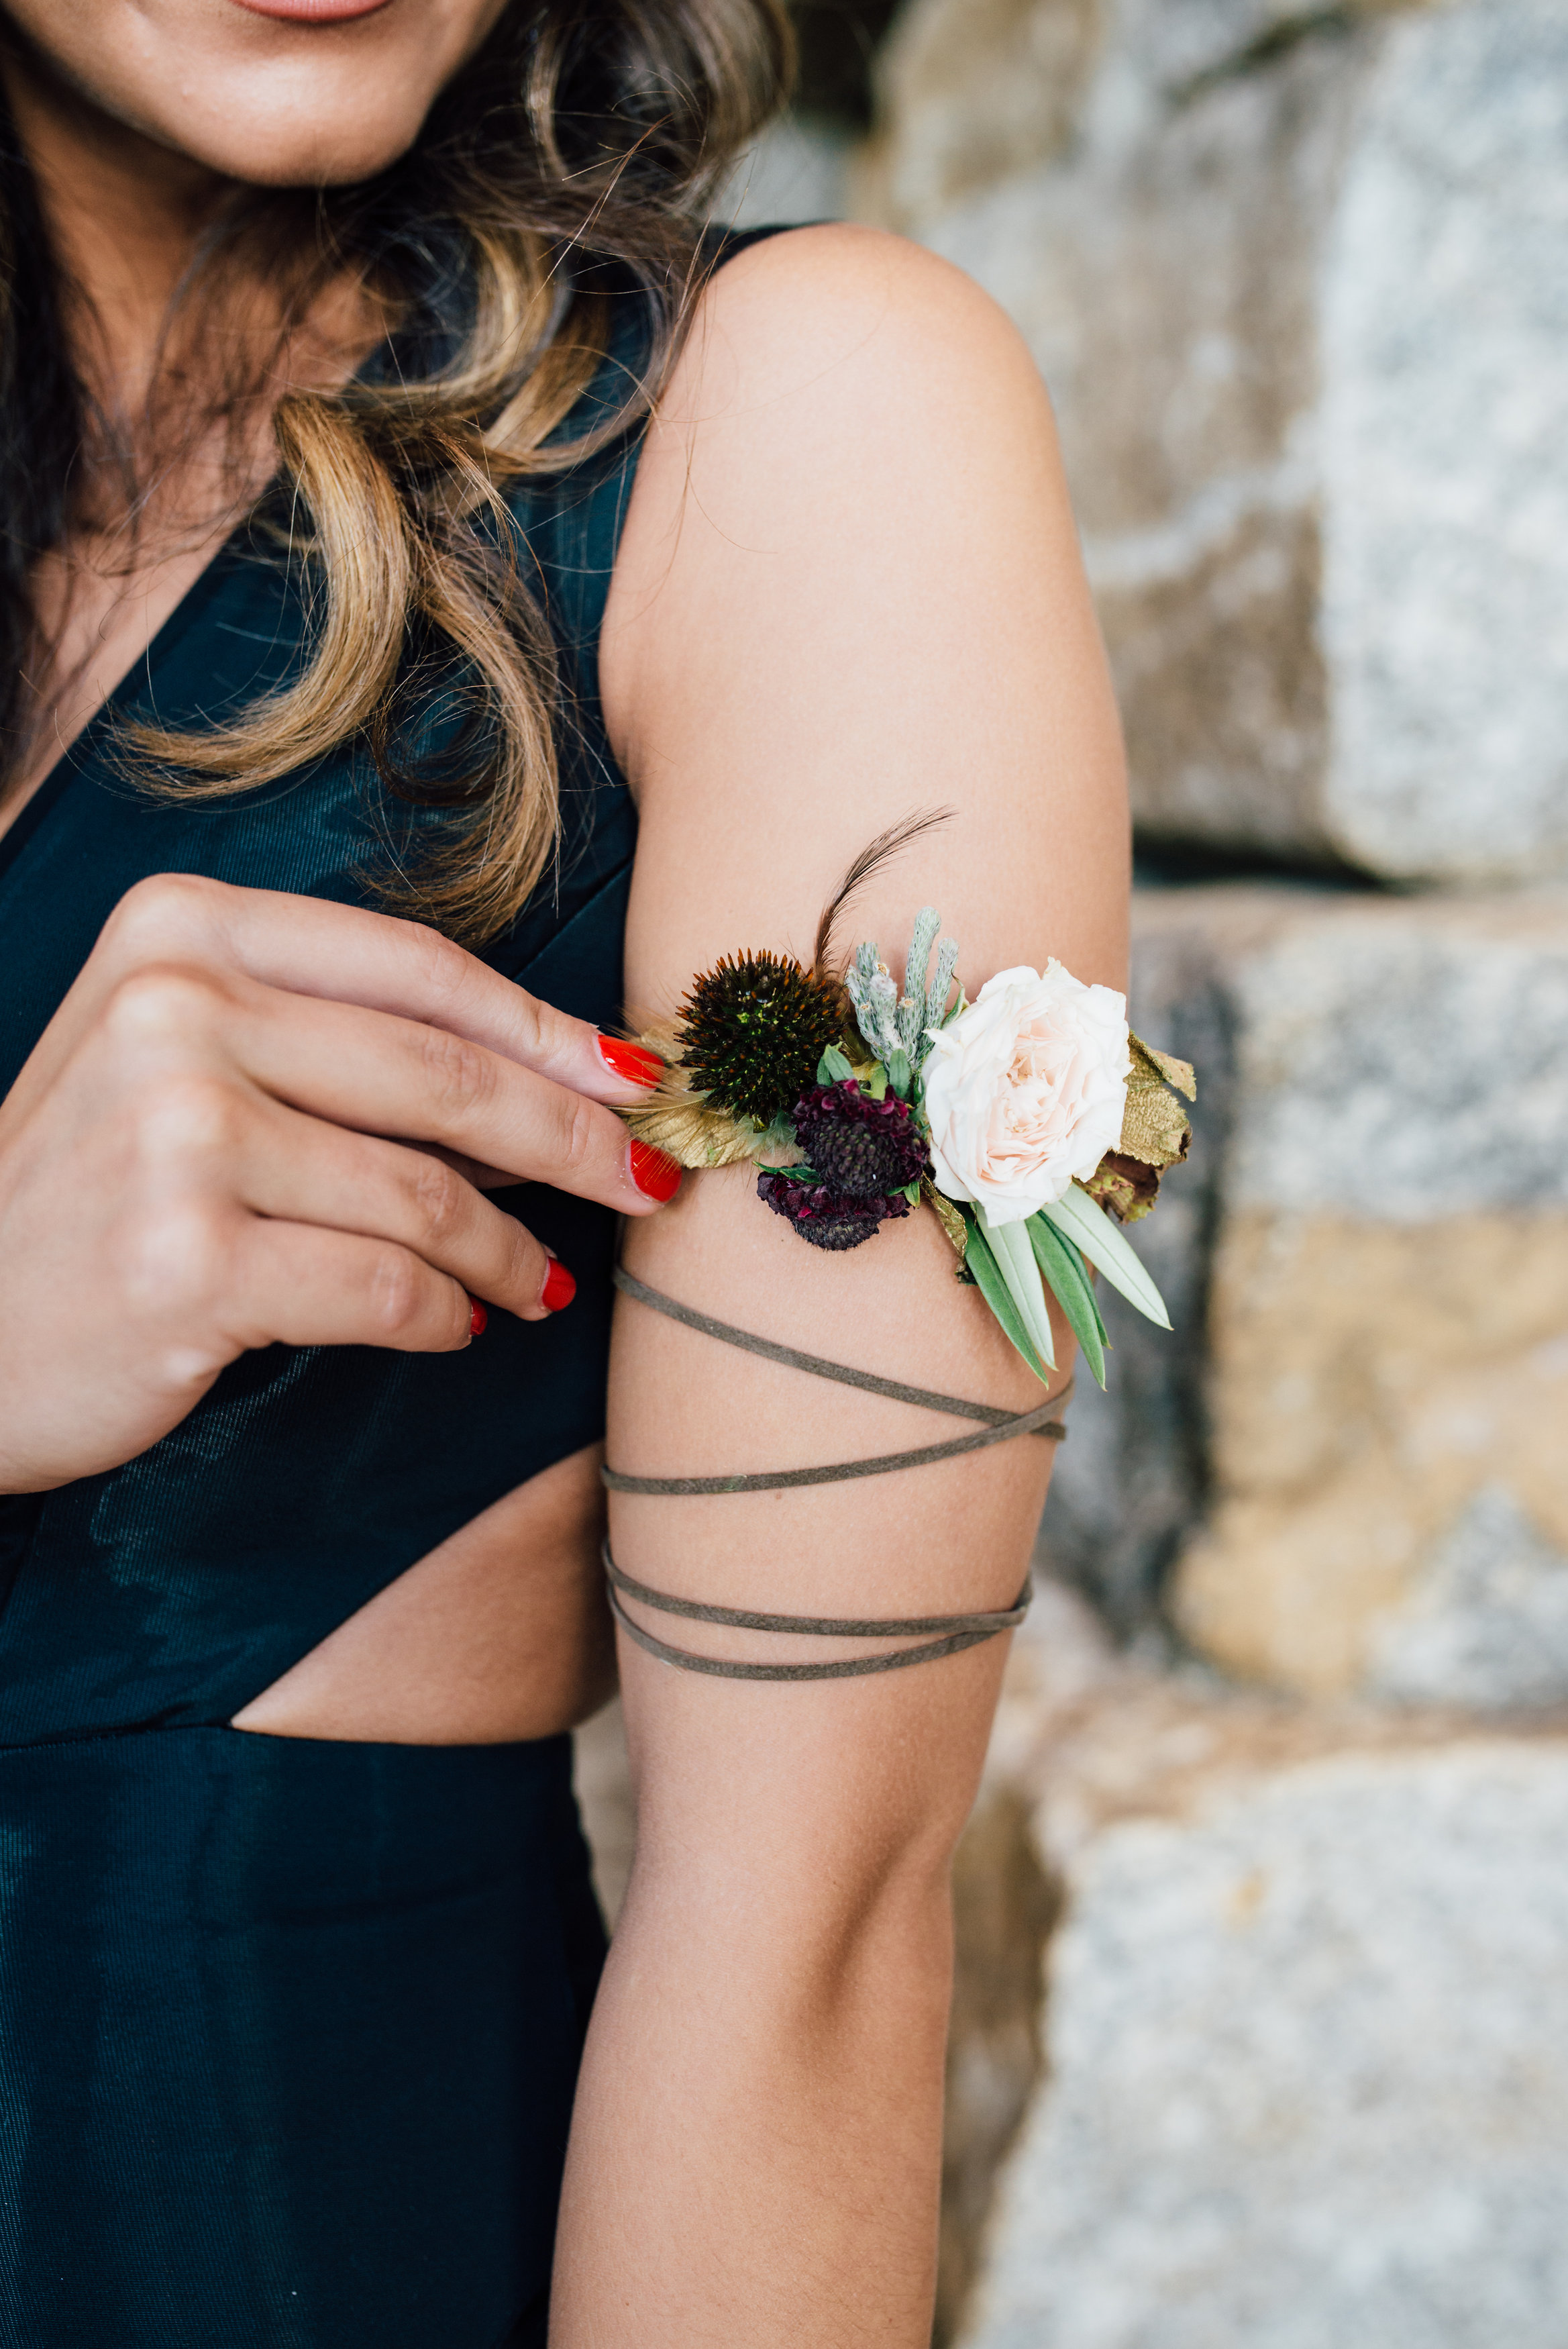  Game of Thrones Editorial Shoot by Whiskey &amp; White Events. At the Old Edwards Inn in Highlands, NC.&nbsp;  Photo by Cameron Reynolds Photography  Design &amp; Styling by Whiskey &amp; White Events  Model is Hannah Humanchuk  Floral armband by Fl